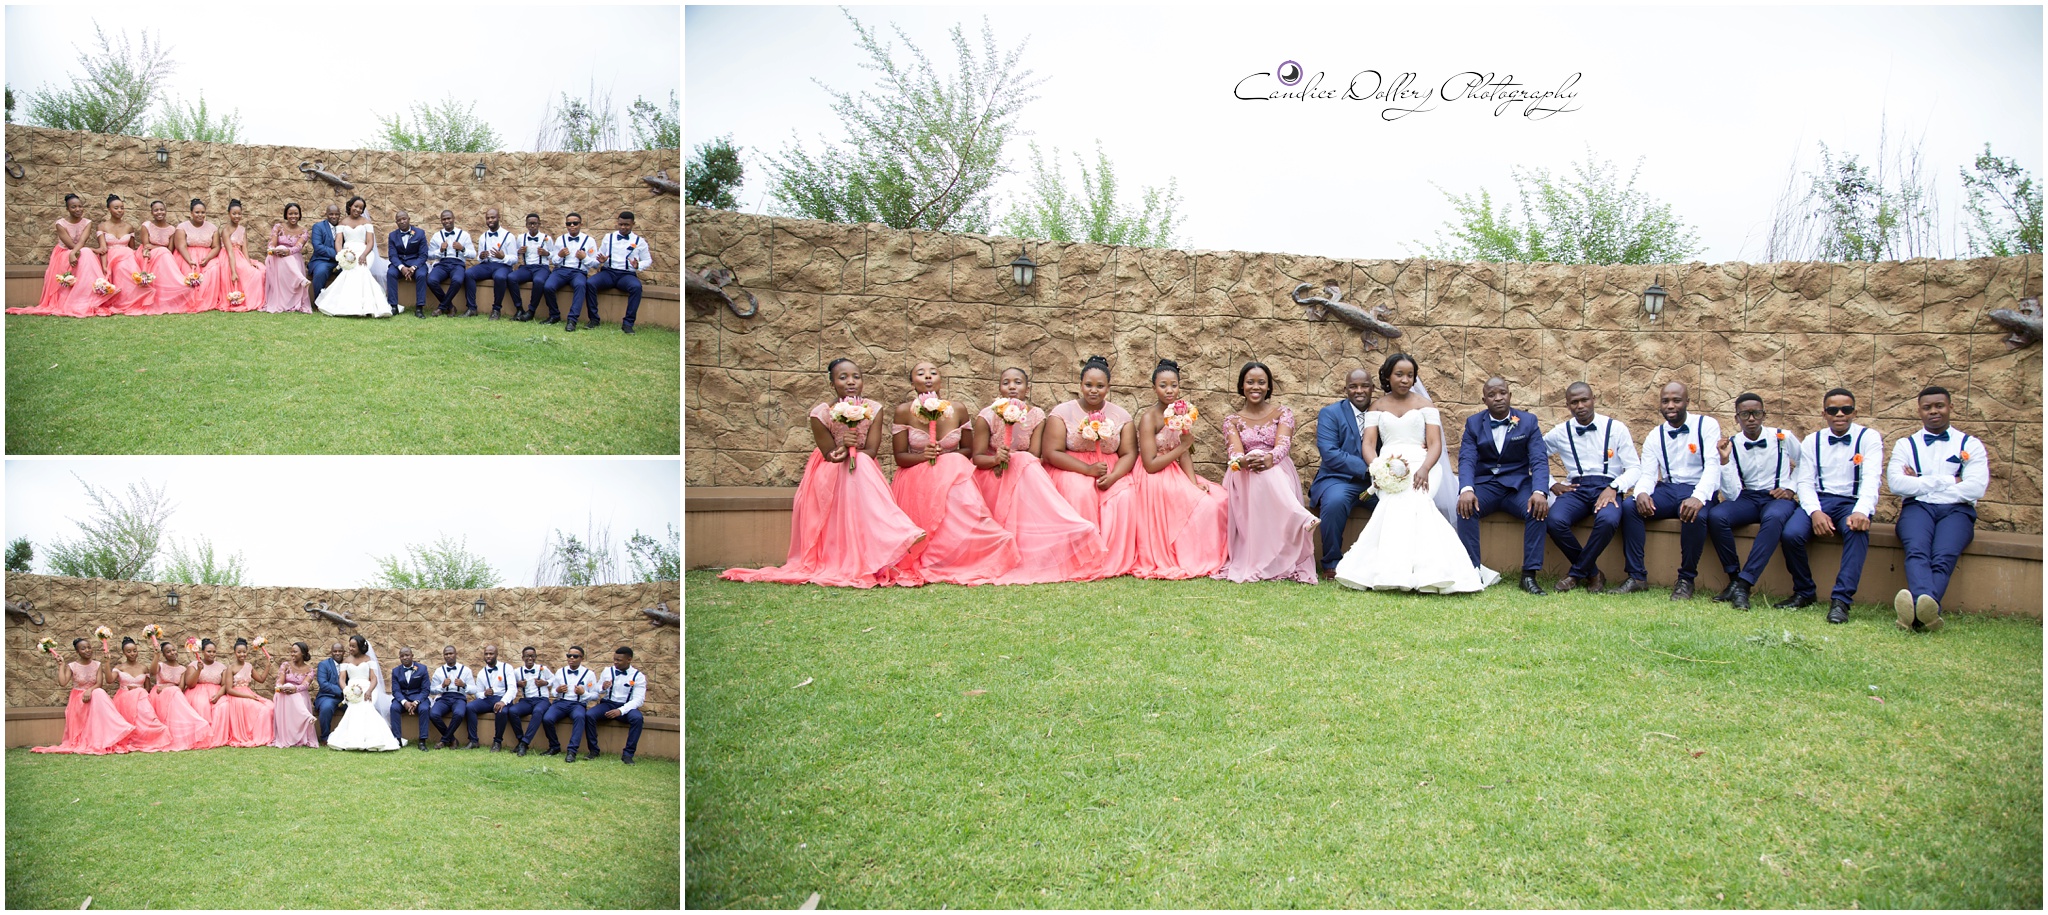 Thembi & Sabelo's Wedding - Candice Dollery Photography_8299